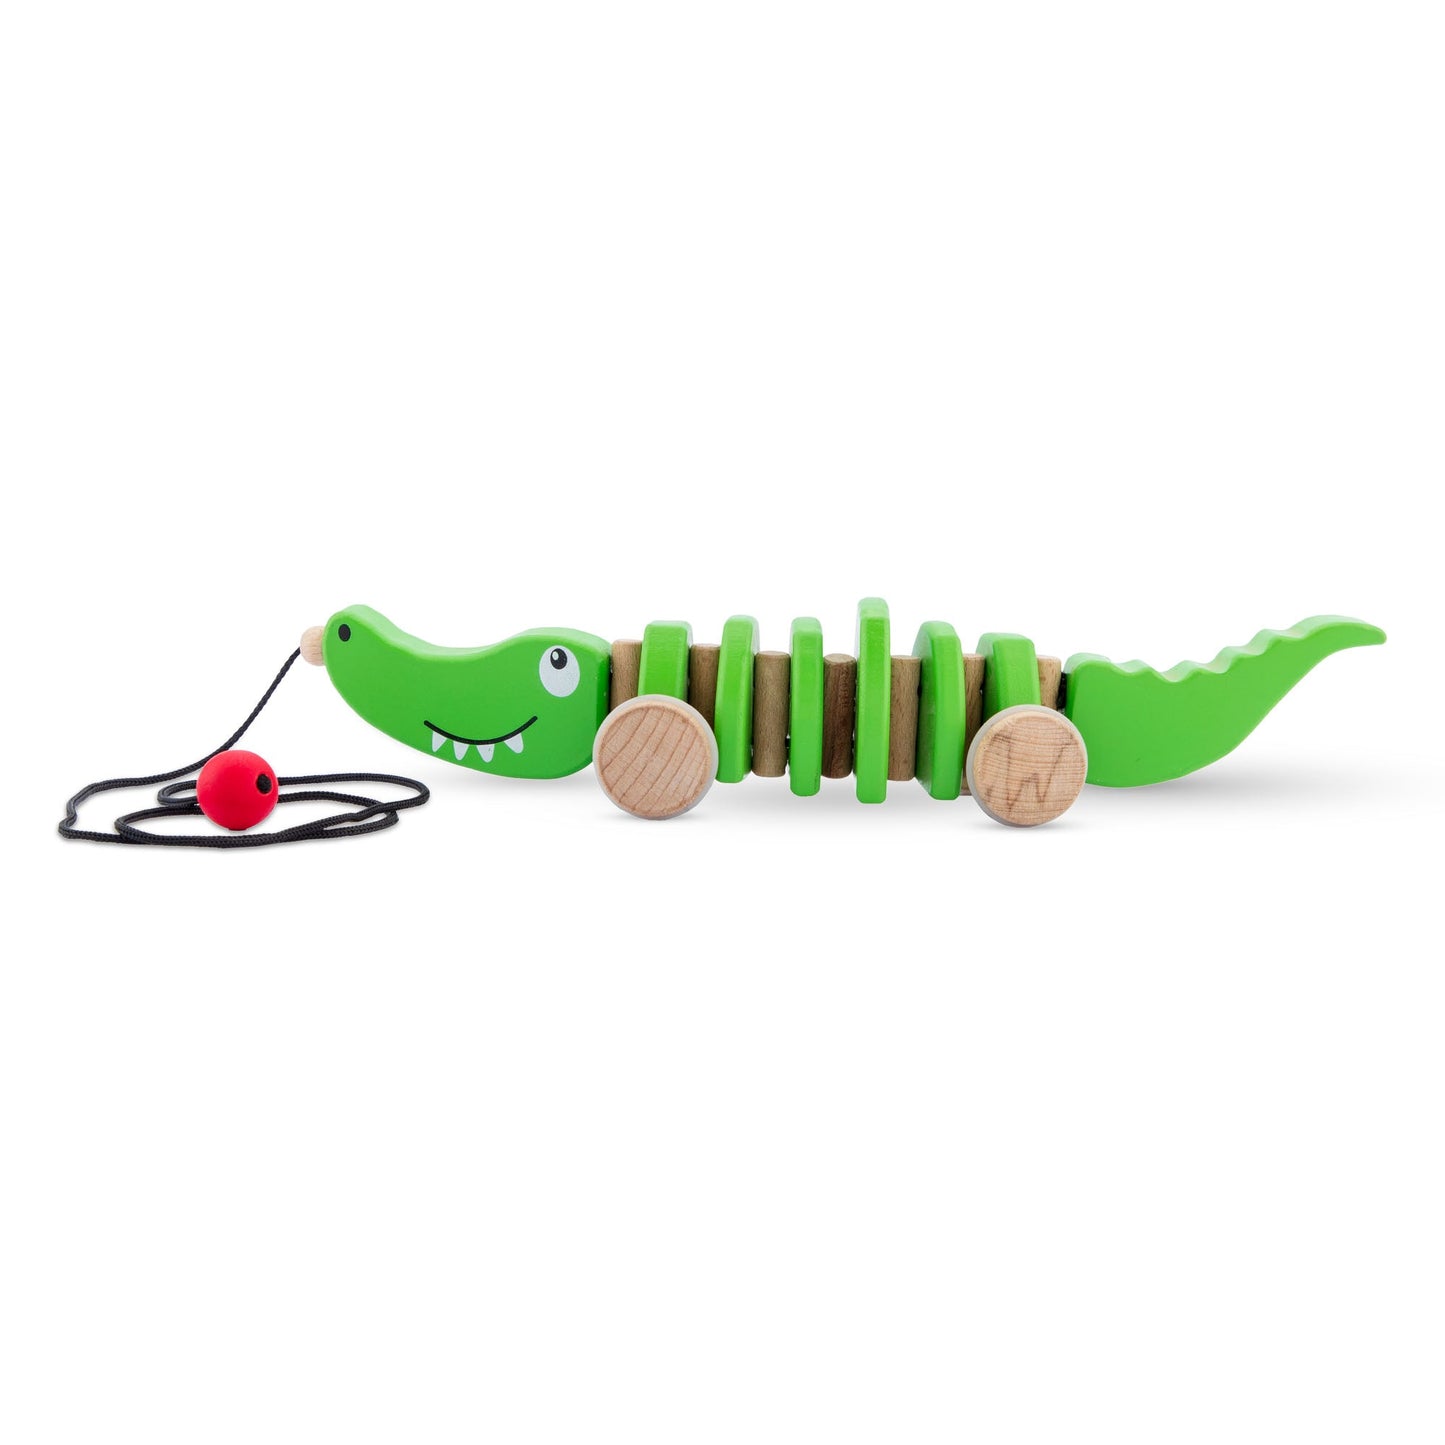 Buy Wooden Crocodile Pull Along Toy - SkilloToys